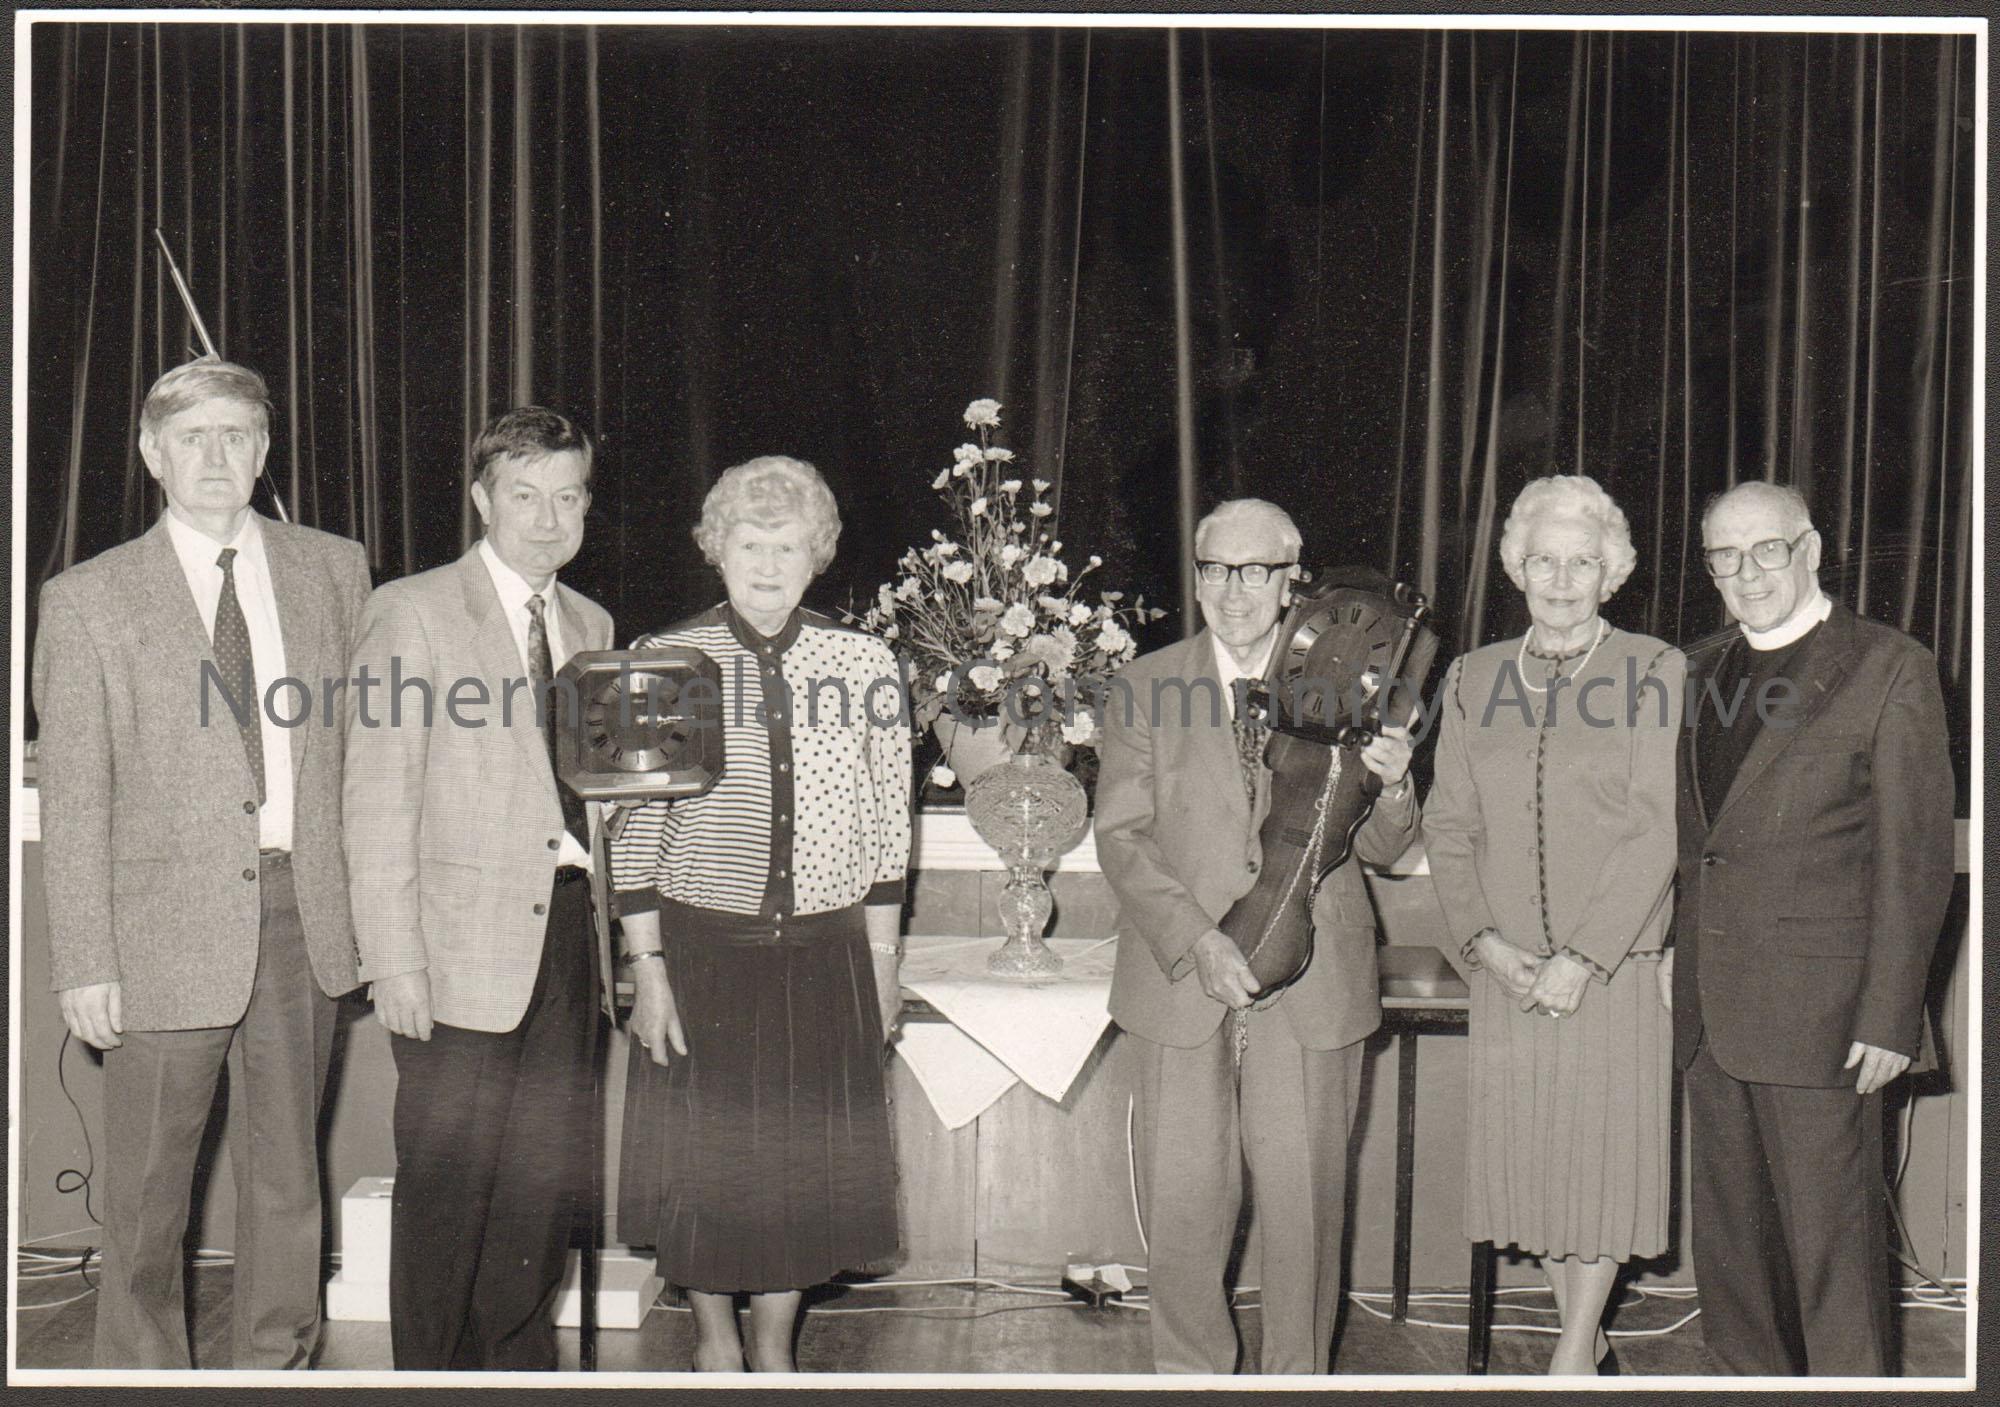 Black and white photograph of six people, including Molly Holmes and James McAfee. Two people are holding clocks. Taken in the Town hall auditorium